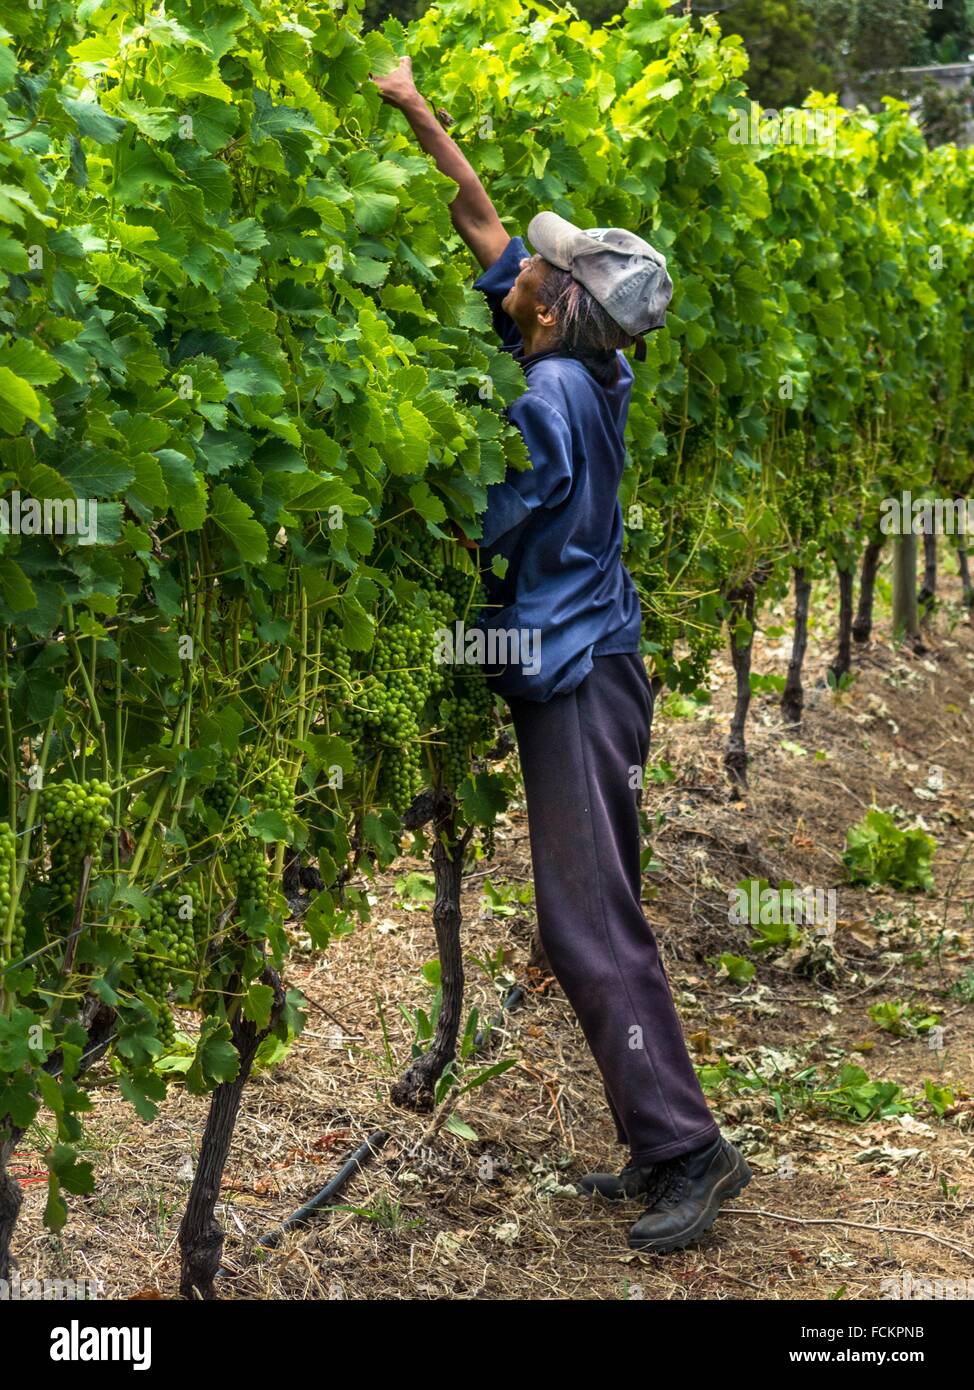 A farmworker busy trimming grape vines in the early summer. Preparing better grapes for good wine. South Africa Stock Photo